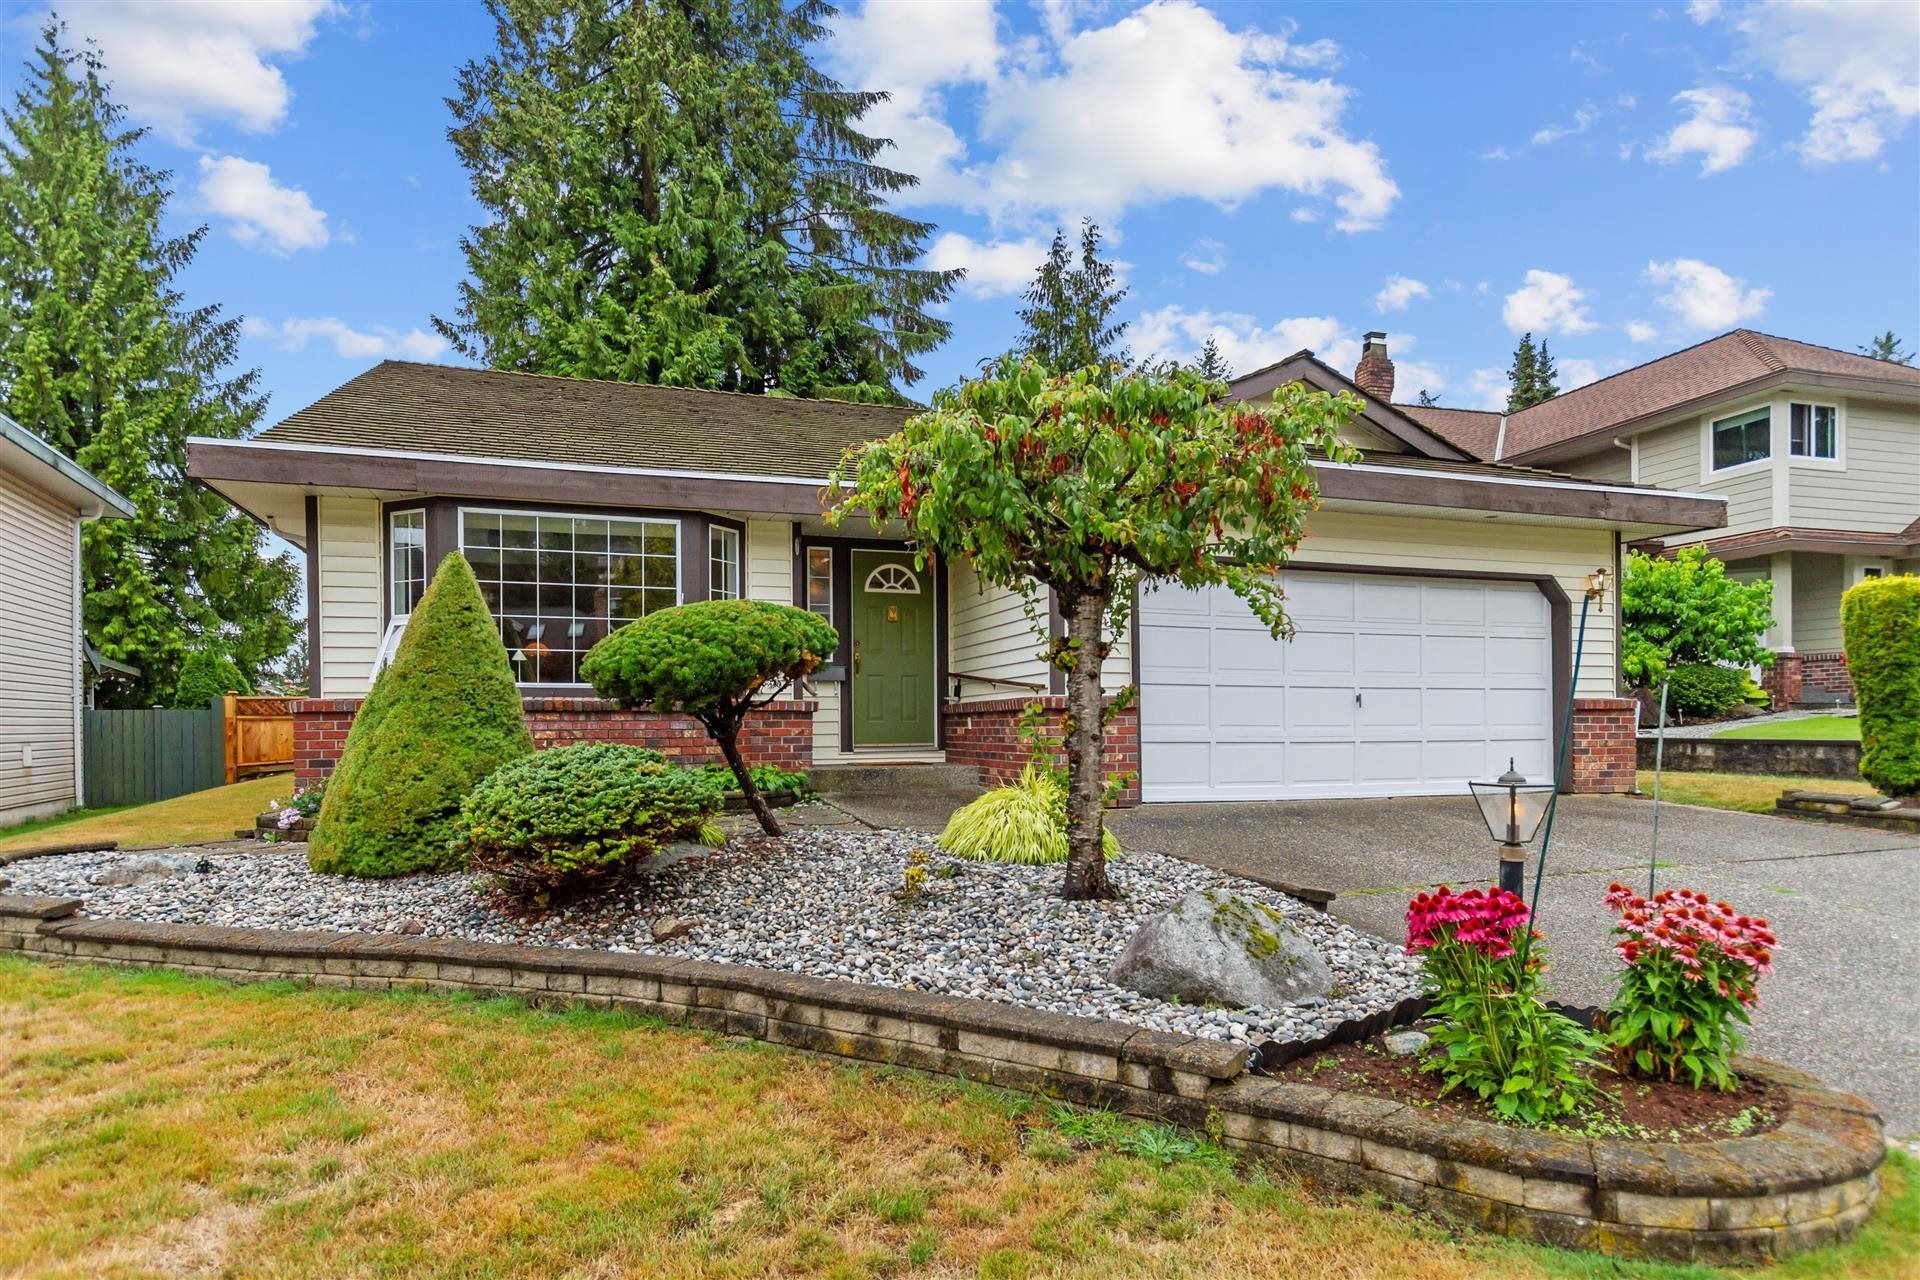 The Thornton Group has just listed ANOTHER home in Heritage Mountain, Port Moody